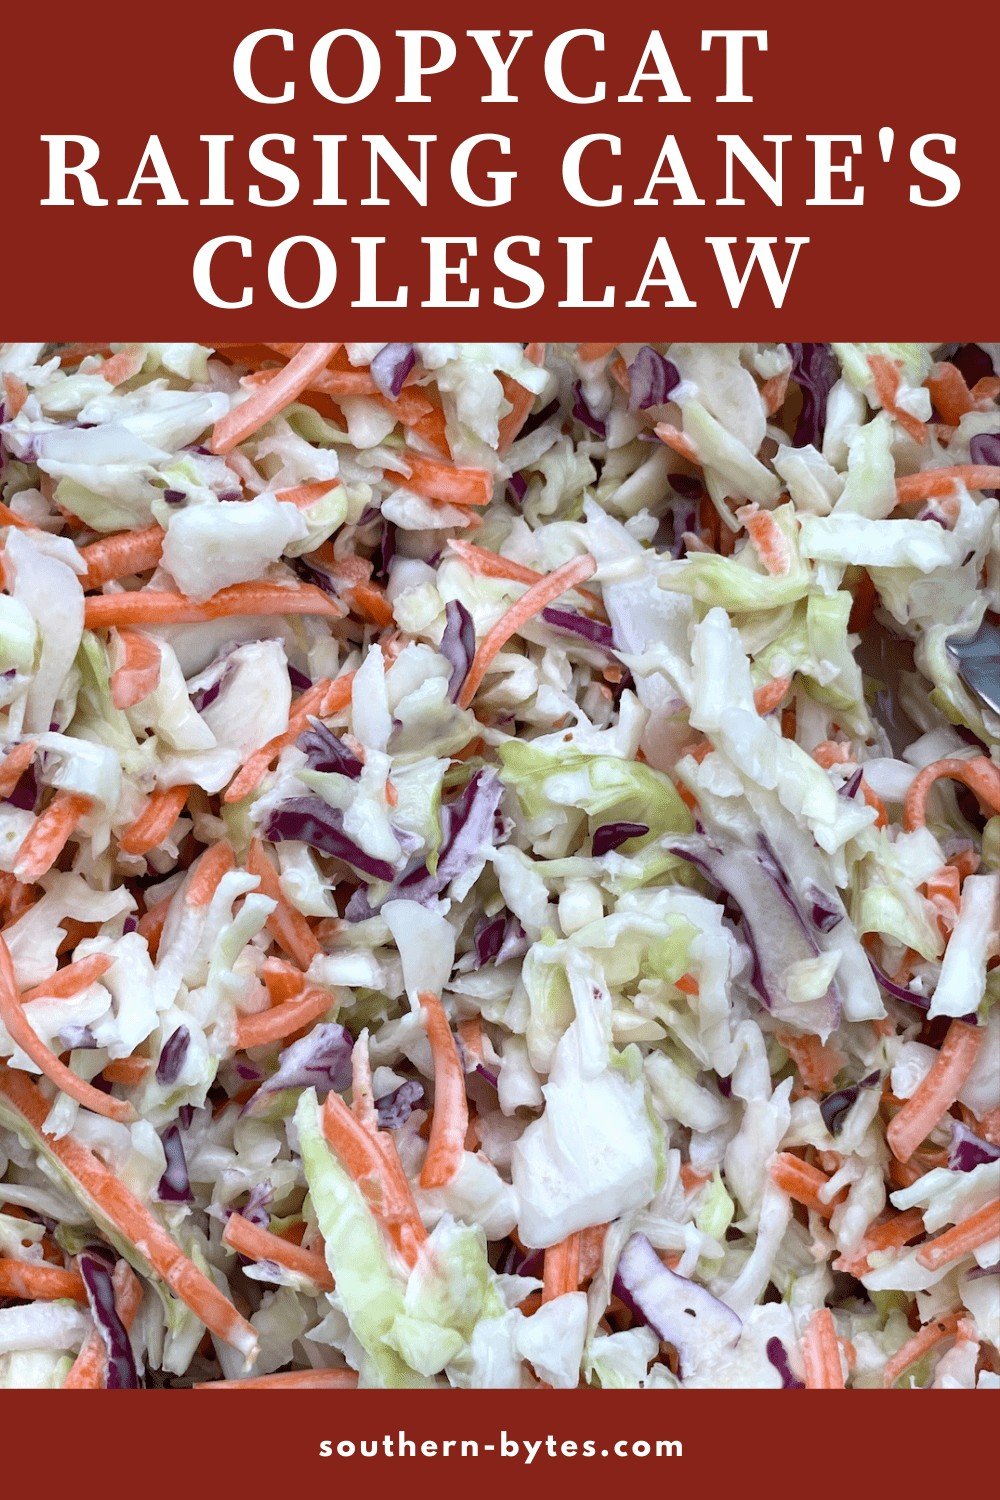 A pin image of copycat Raising Cane's Coleslaw (shredded carrots & cabbage covered in mayonnaise) up close.